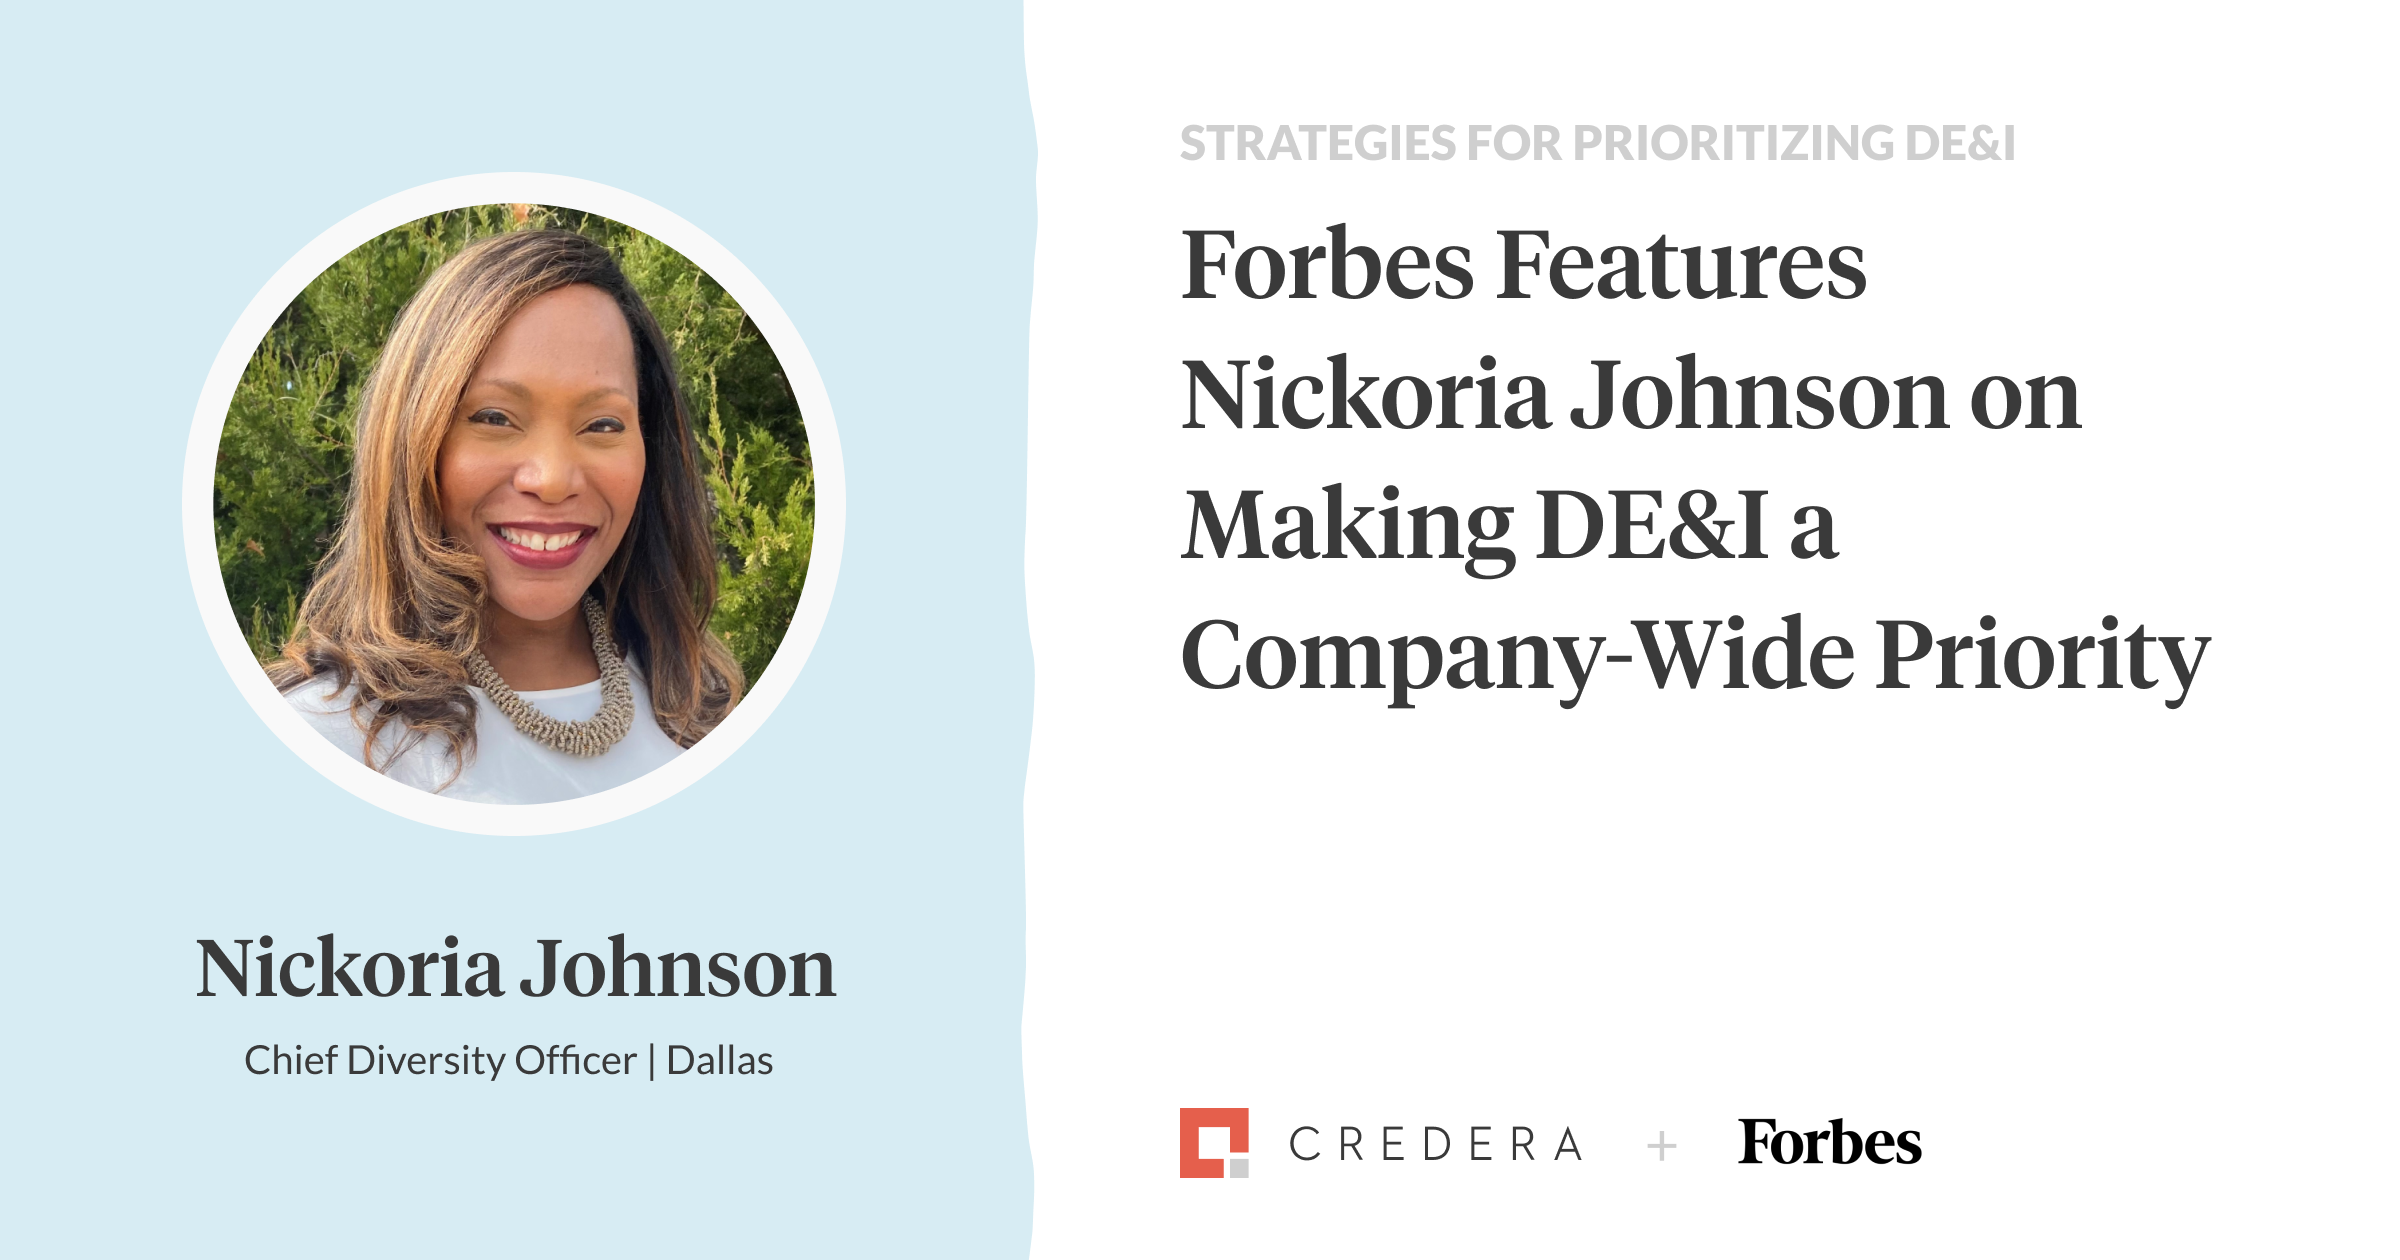 Credera’s Nickoria Johnson Speaks With Forbes About Prioritizing DE&I 